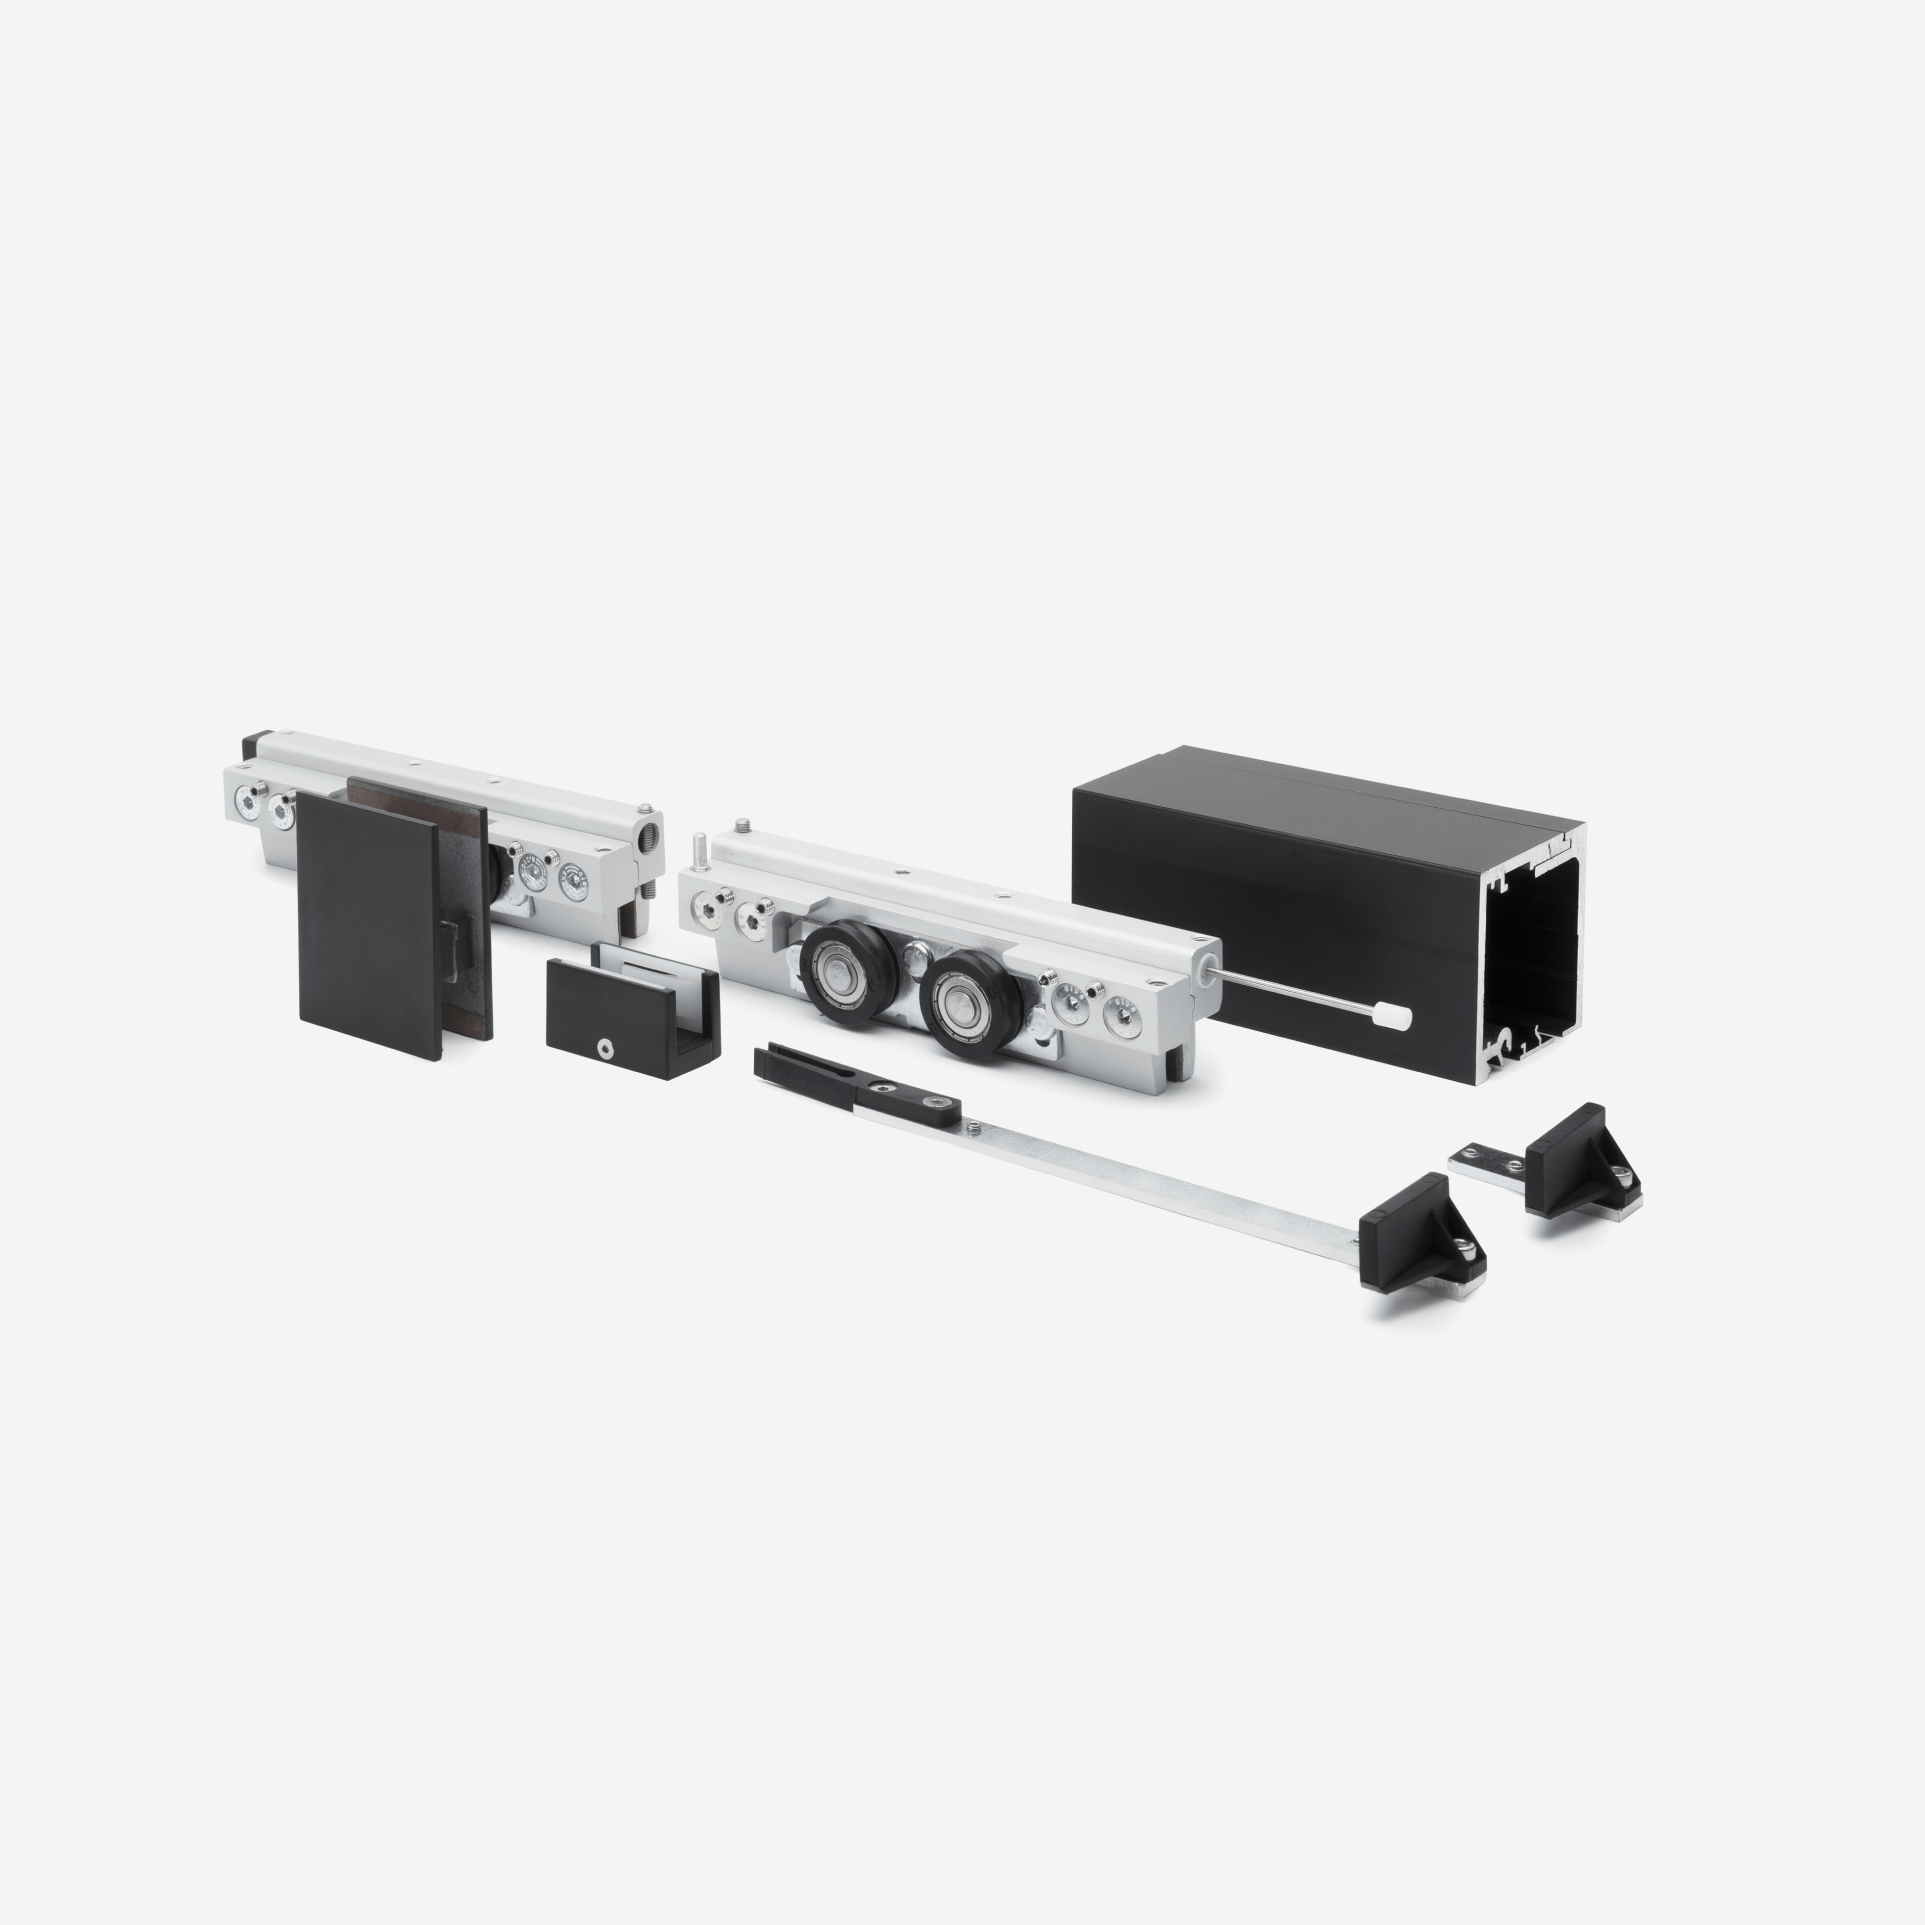 CGS-200 Wall or Ceiling Mount Sliding Door Kit with 157" Track and Anti-Shock Mechanism